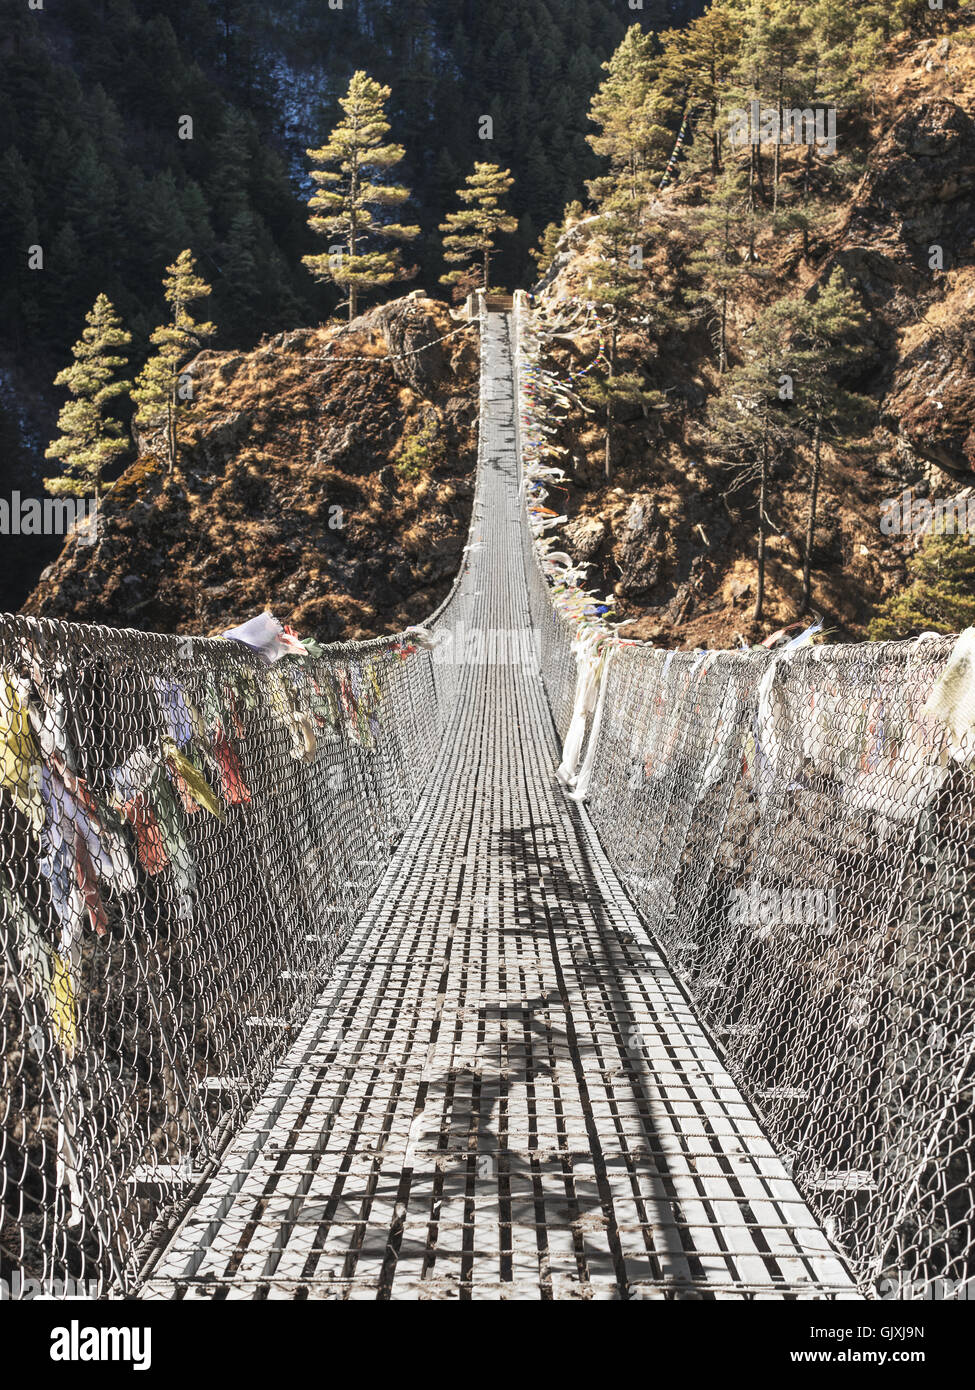 A suspended, prayer flag-covered bridge in the Himalayan Mountains of Nepal Stock Photo